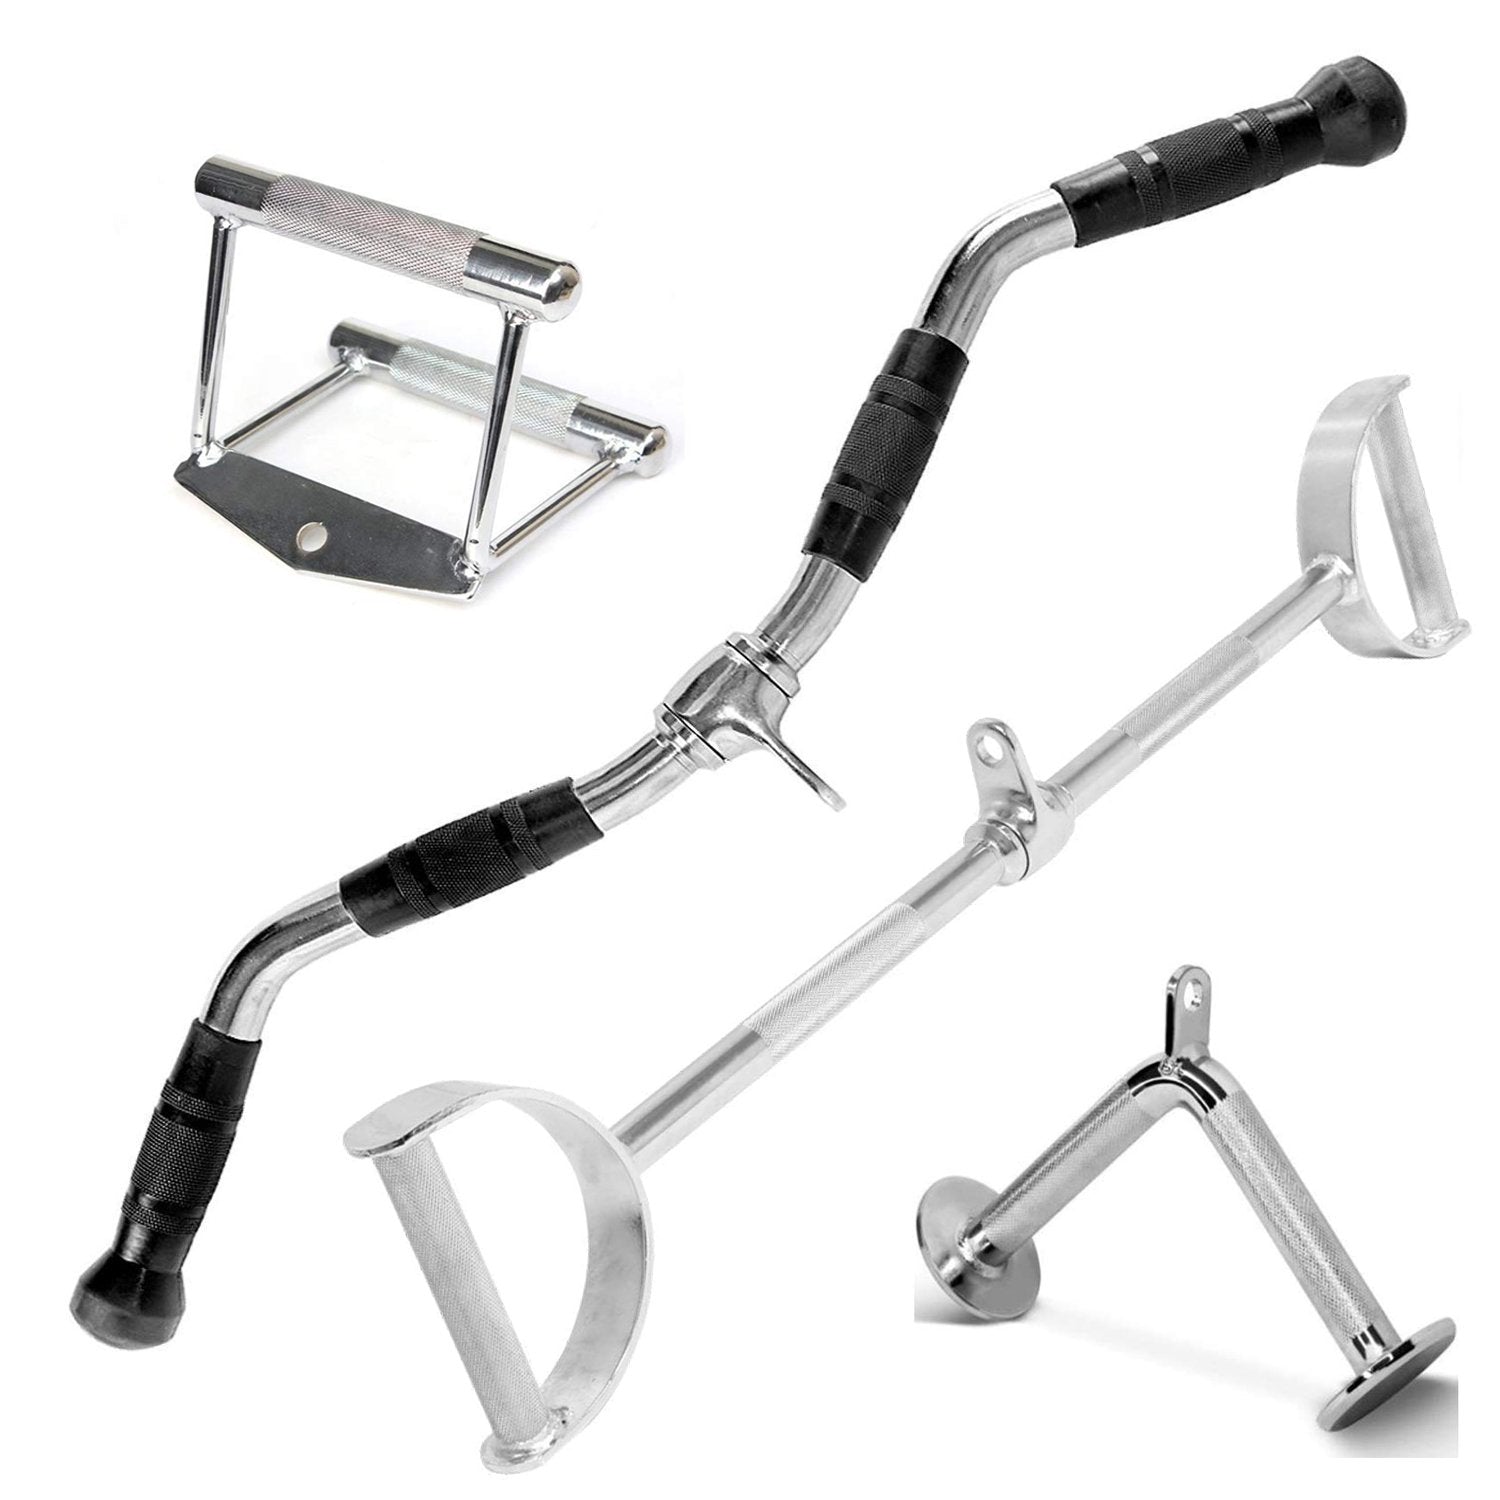 FITNESS MANIAC 28" Chrome LAT Bar Combo Tricep Press Down Cable Attachment Set | Double D Handle, V-Shaped Bar, Rotating Straight Bar